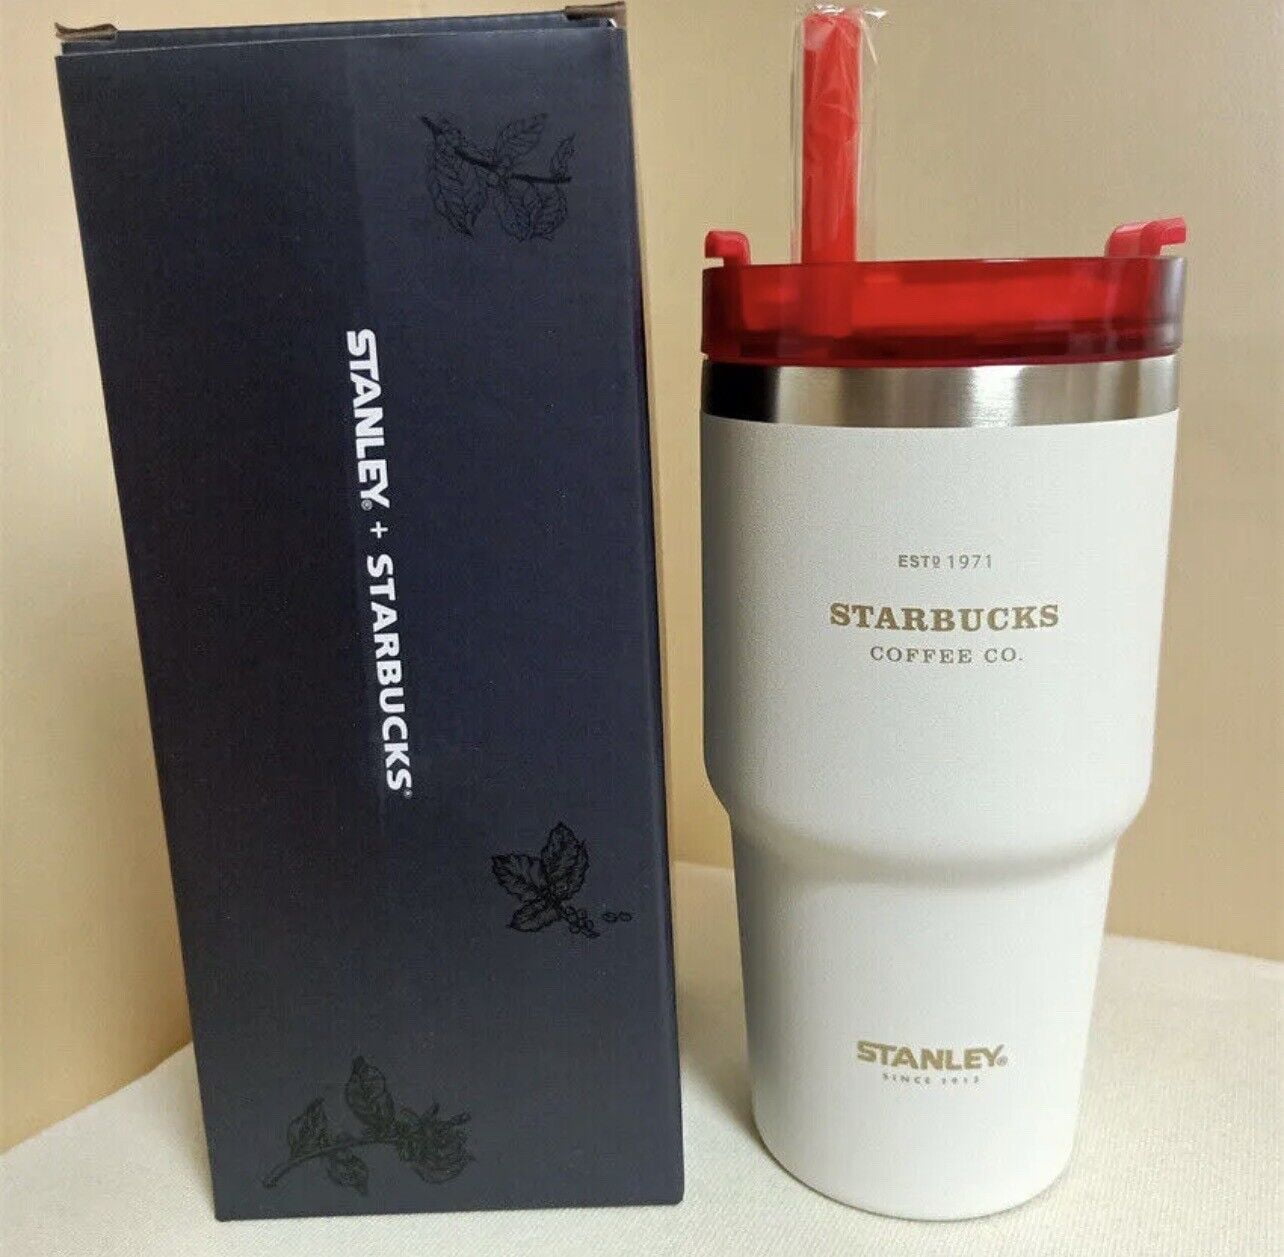 Starbucks 365ml/12oz Stainless Steel Travelling Cup with Strap